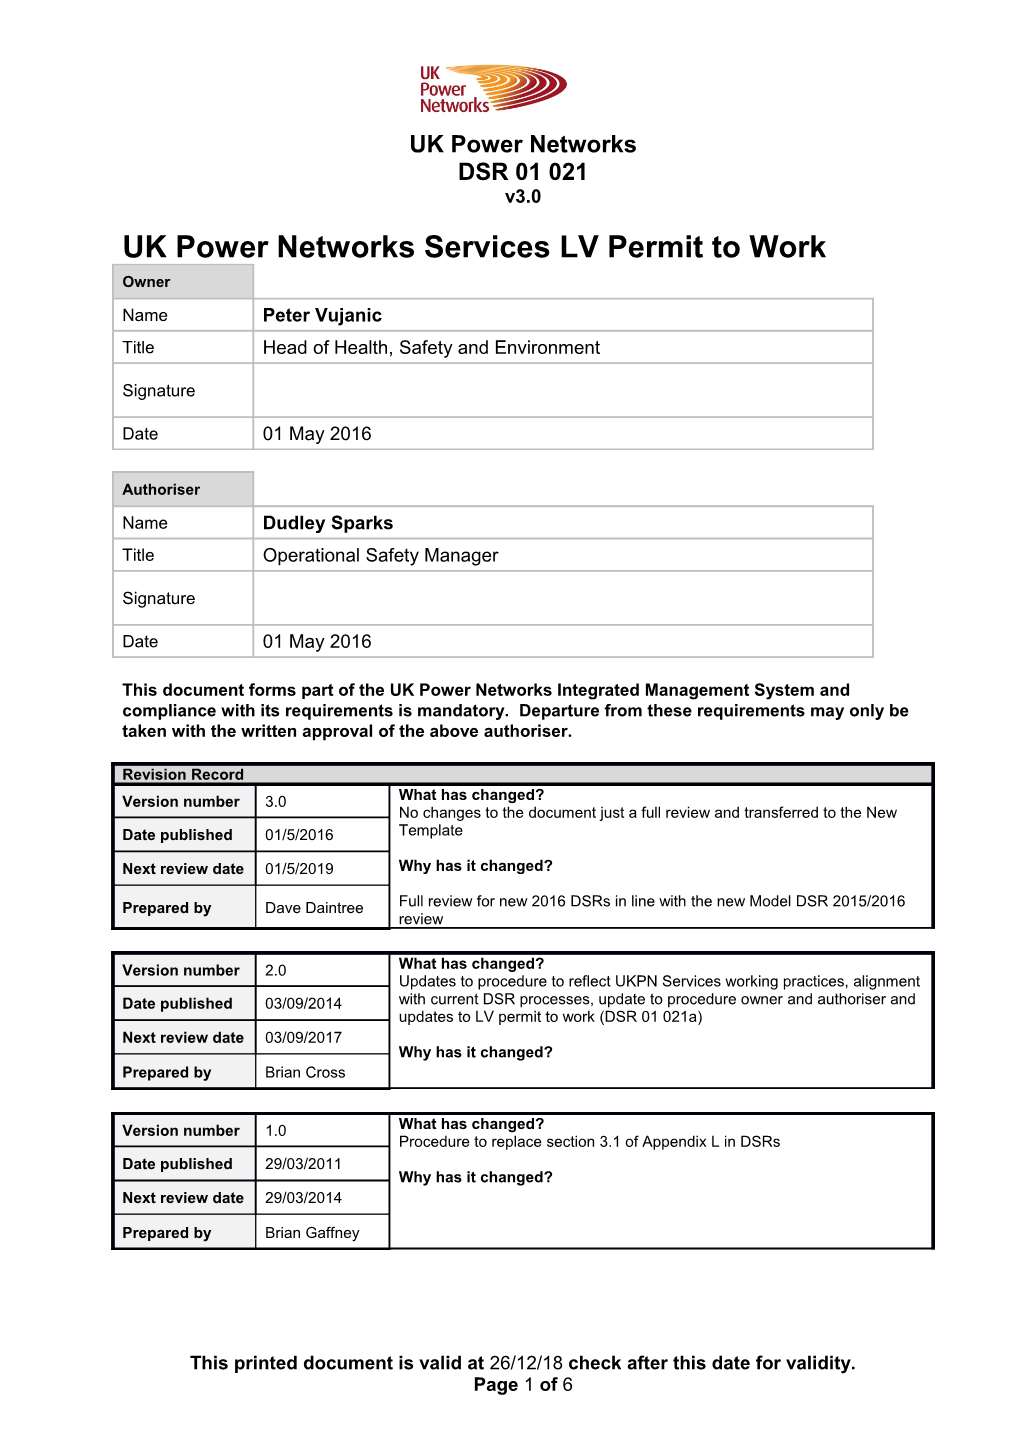 DSR 01 021 UK Power Networks Services LV Permit to Work